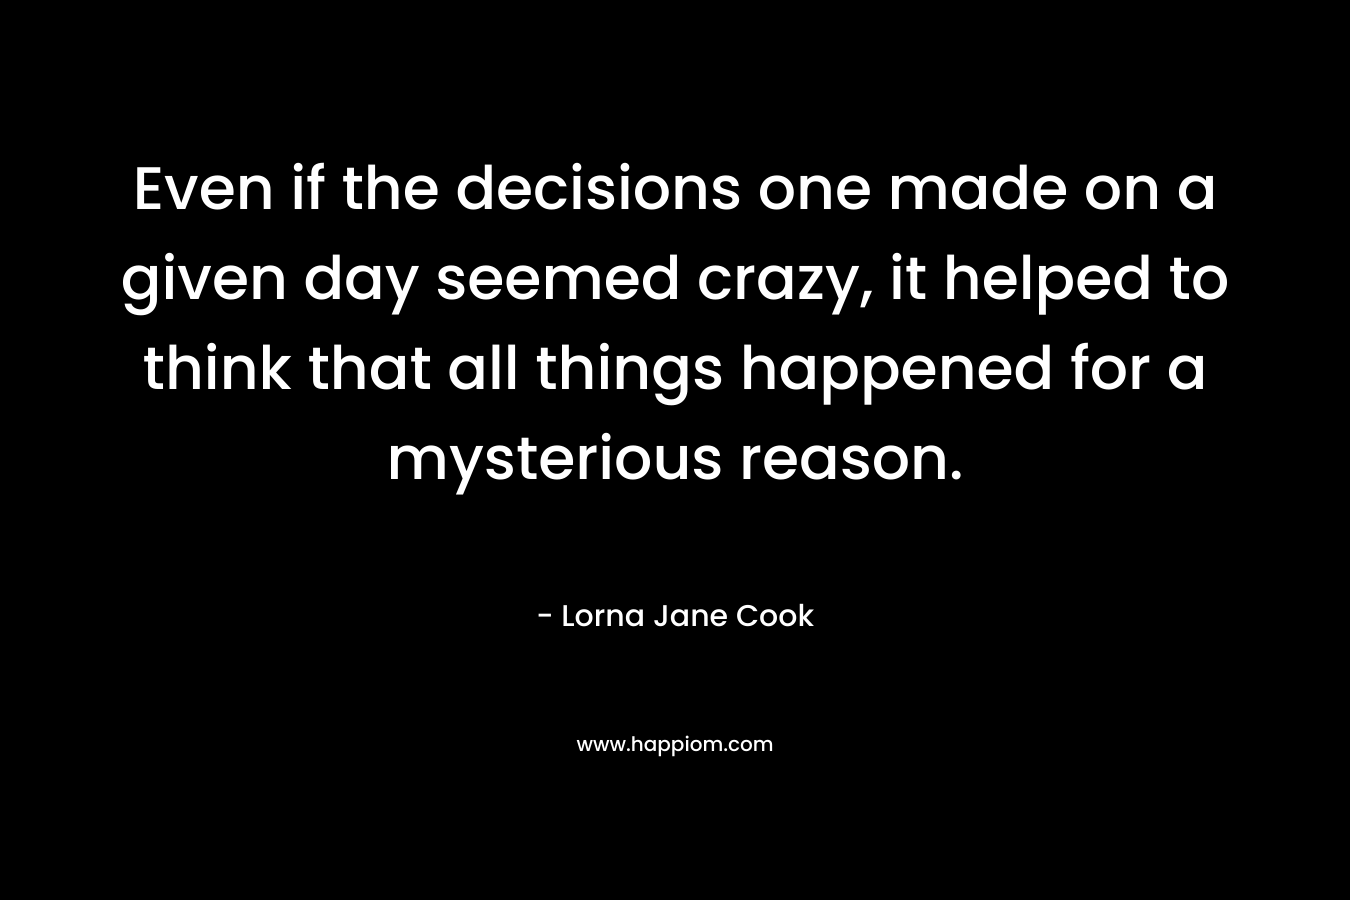 Even if the decisions one made on a given day seemed crazy, it helped to think that all things happened for a mysterious reason.